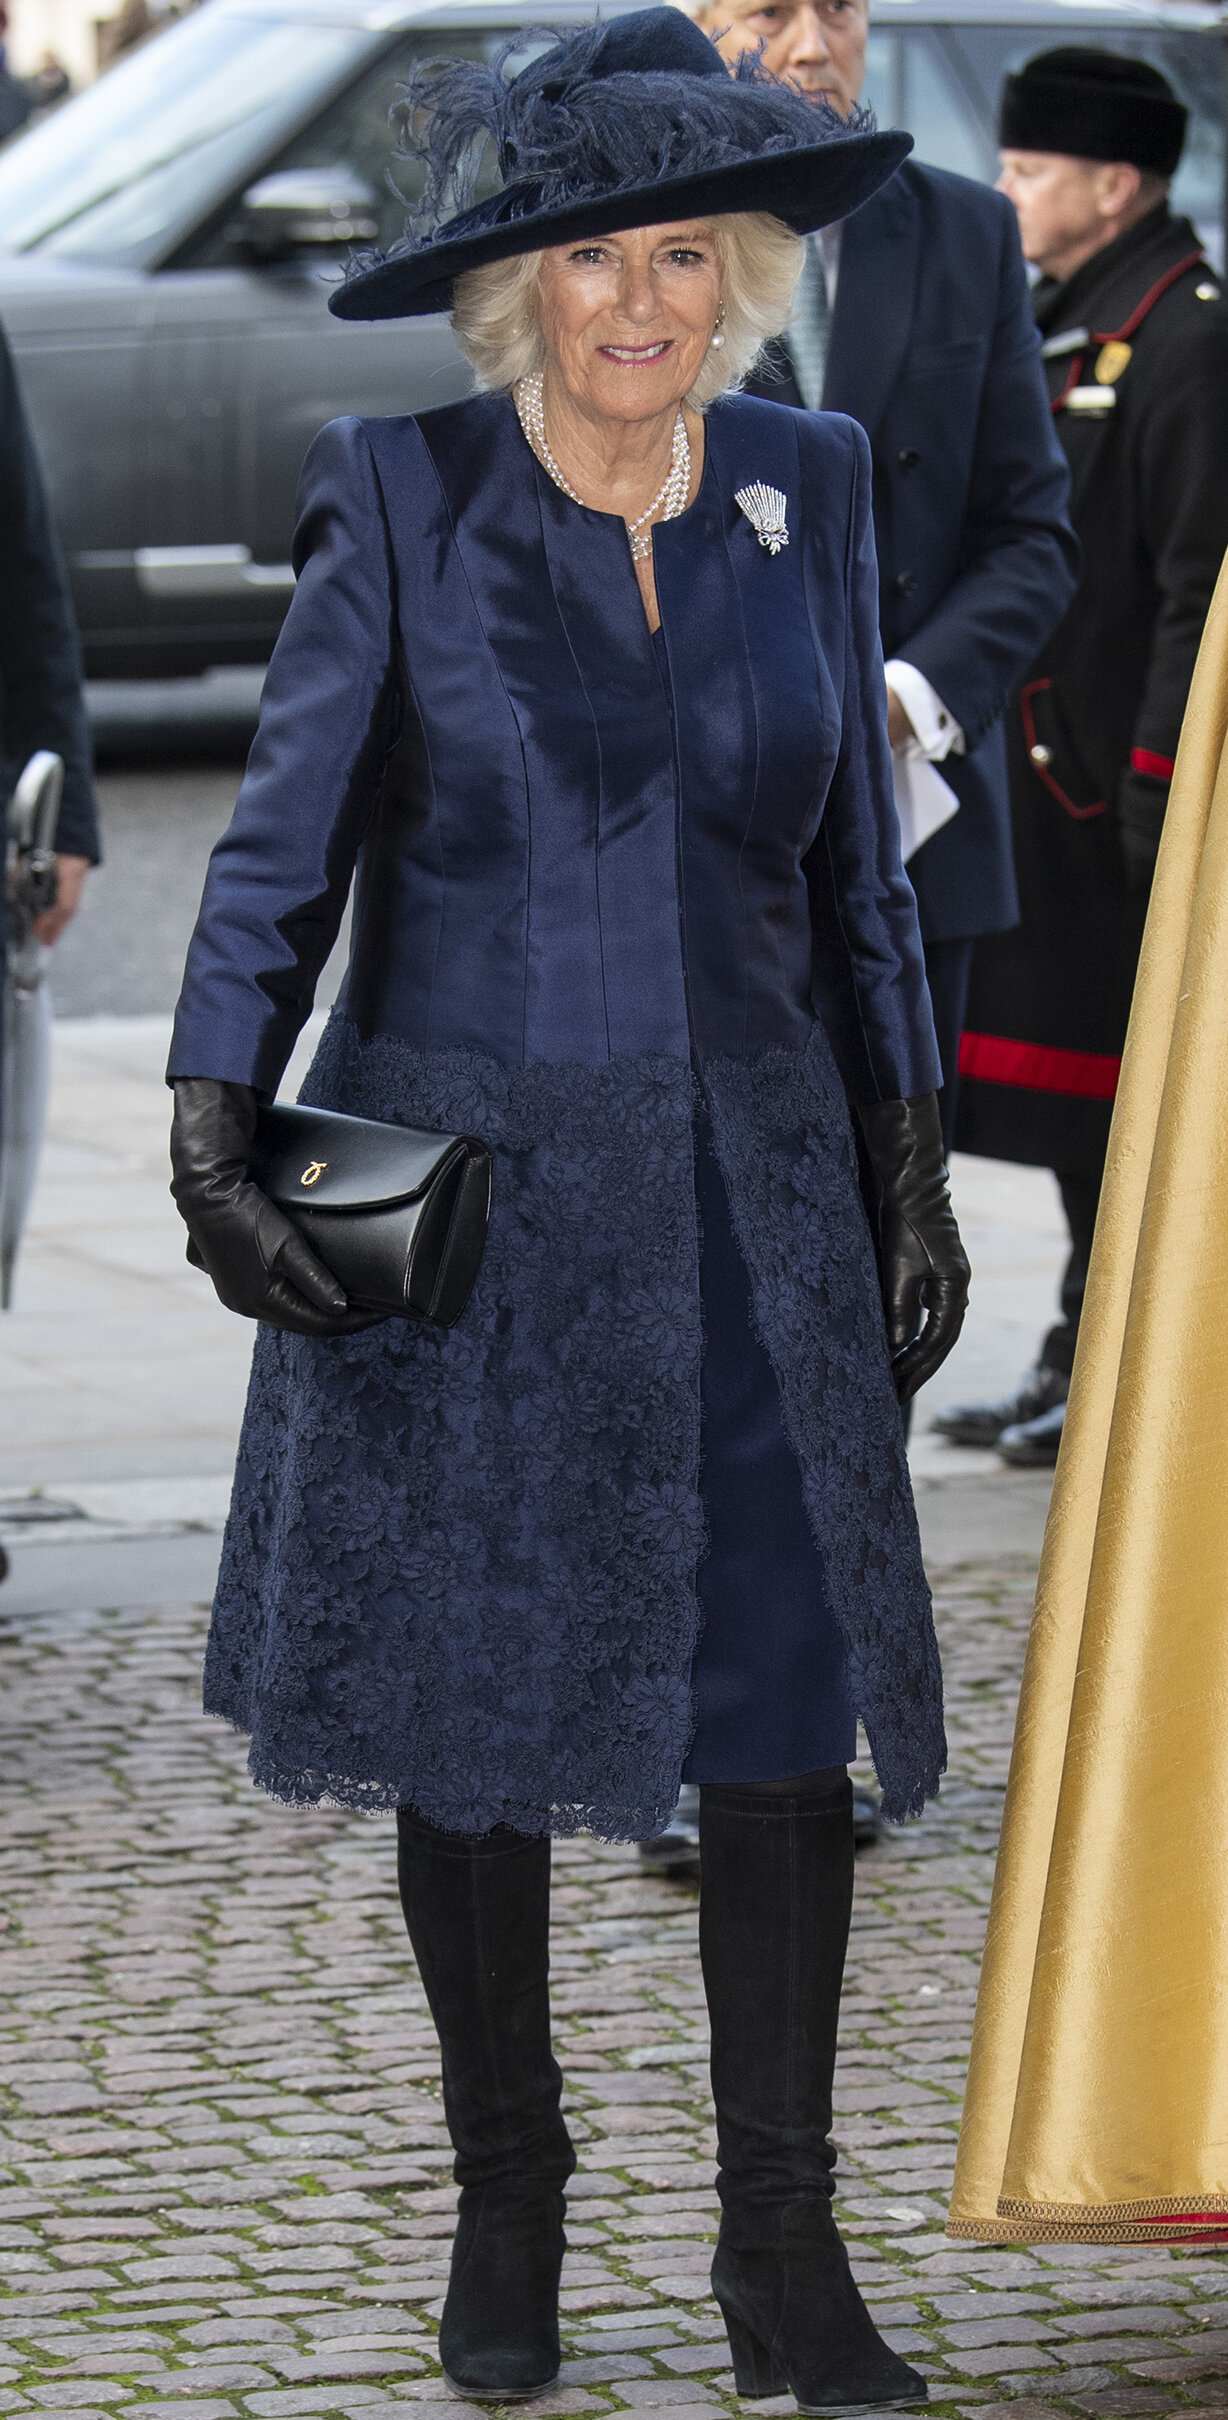 The Prince of Wales and the Duchess of Cornwall Attend Service at ...